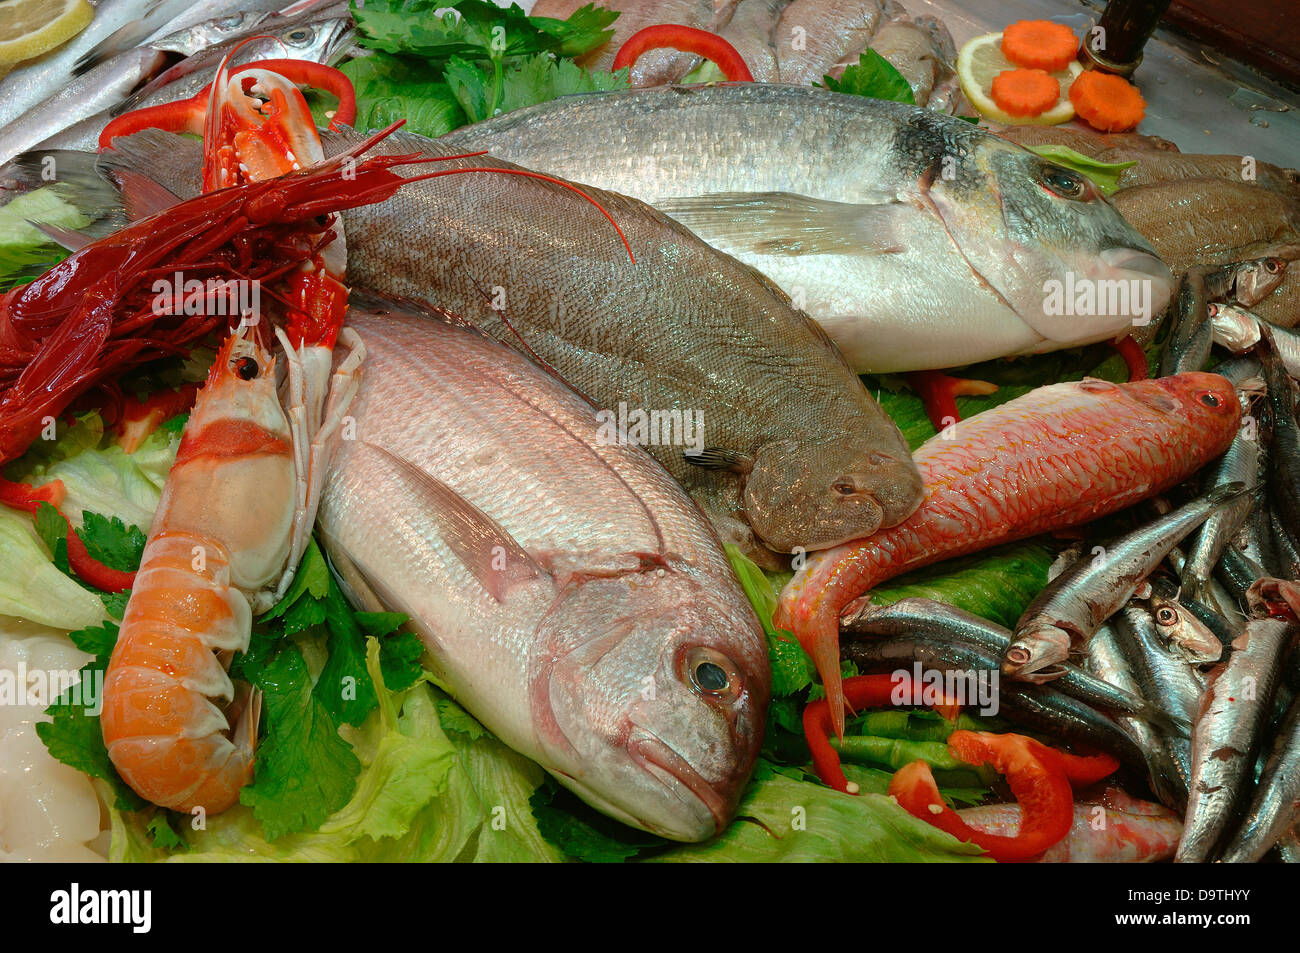 Fresh fish and seafood, Cadiz, Region of Andalusia, Spain, Europe Stock Photo